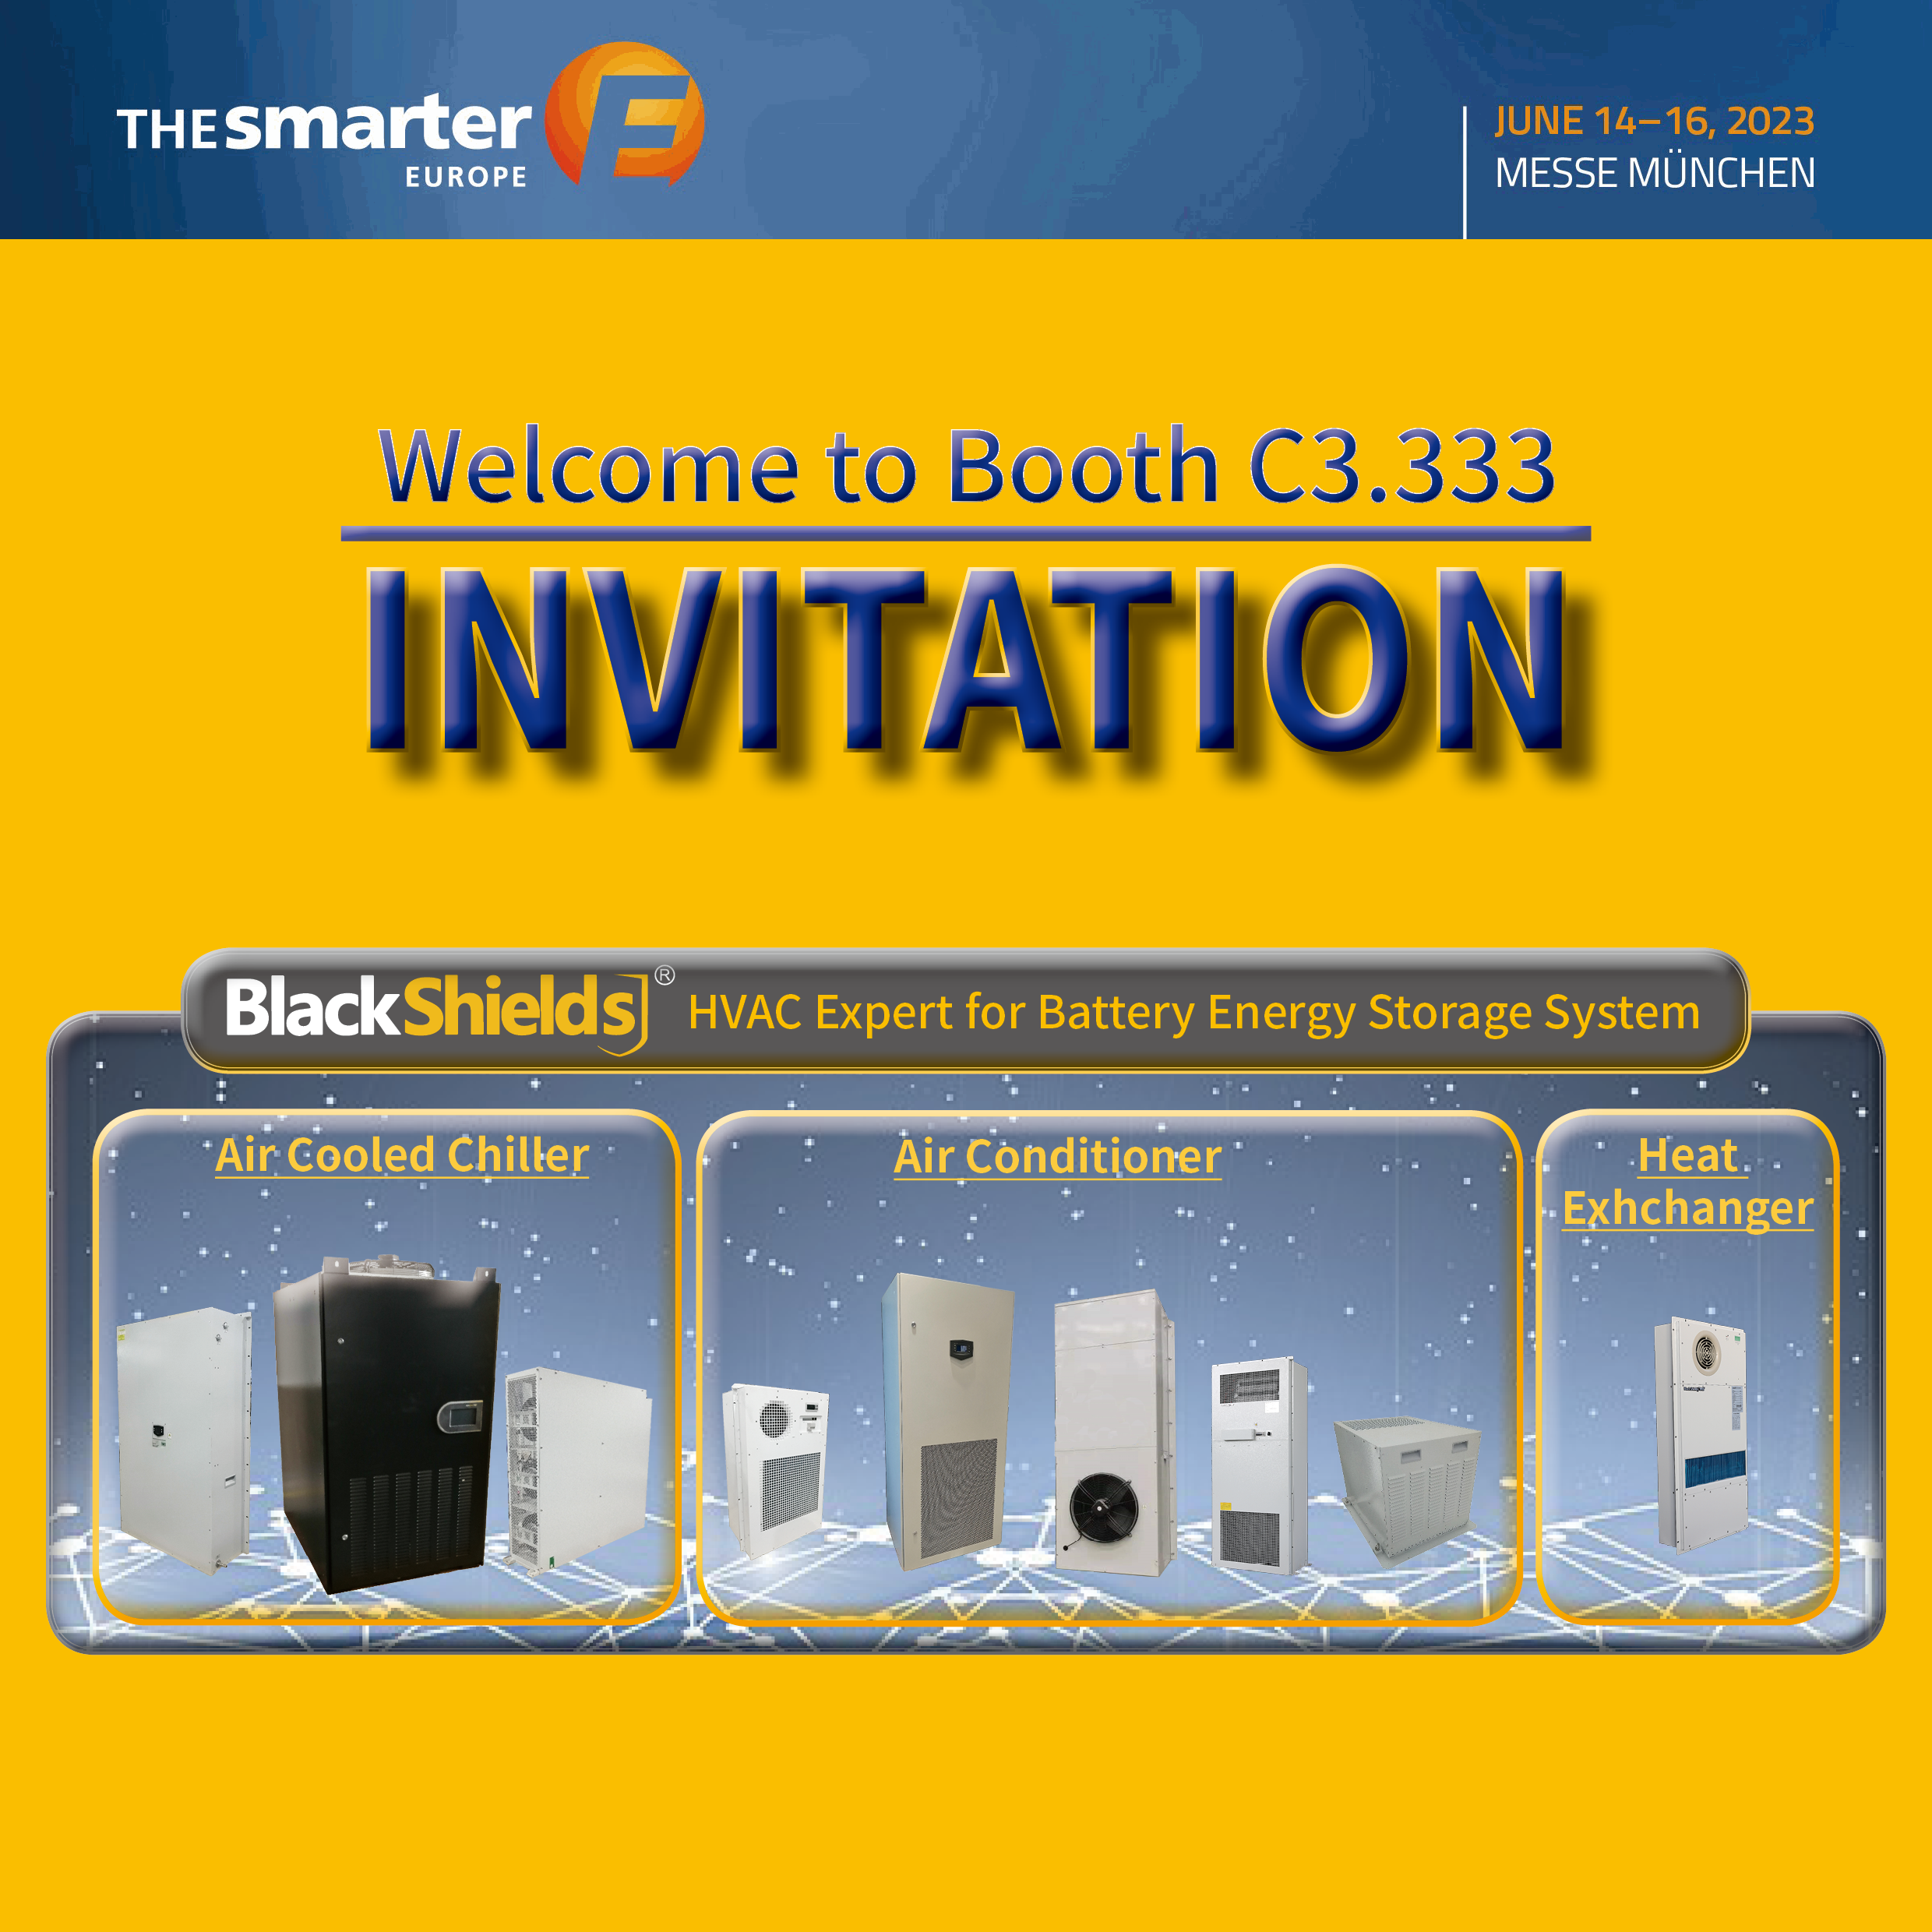 BlackShields will be on show at The Smart E Europe 2023